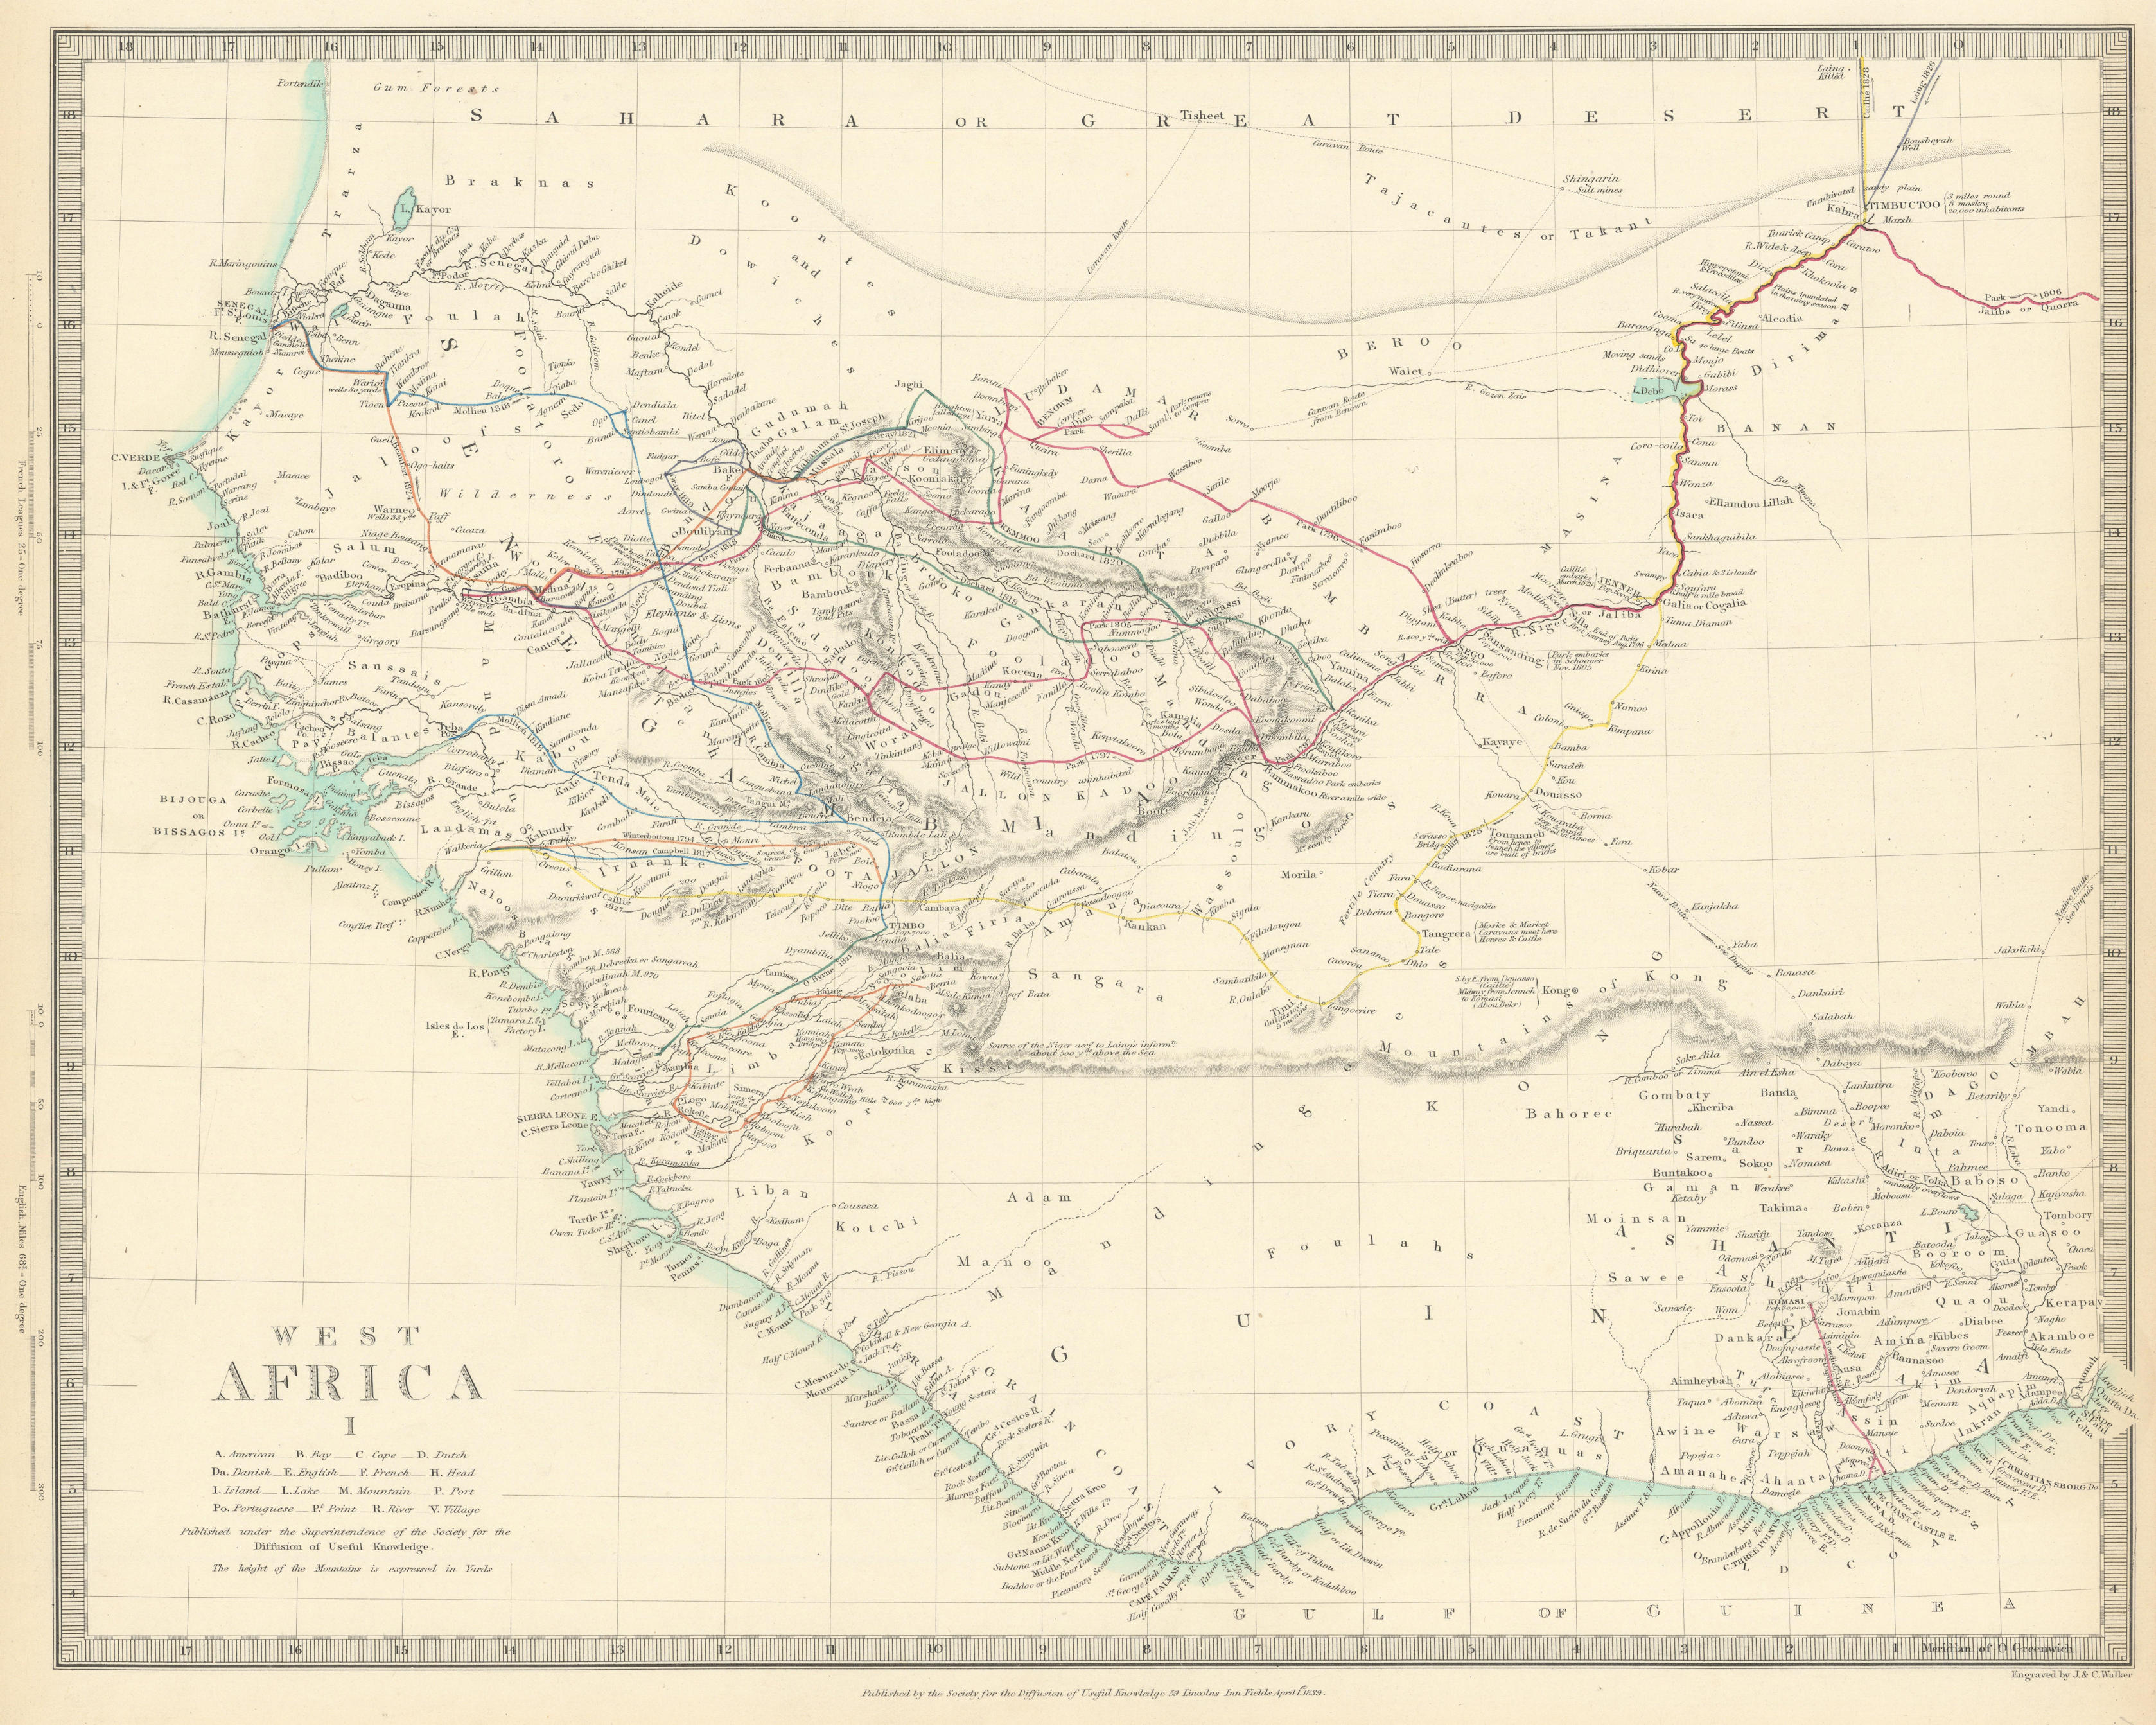 WEST AFRICA showing early explorers' routes & Mountains of Kong. SDUK 1844 map